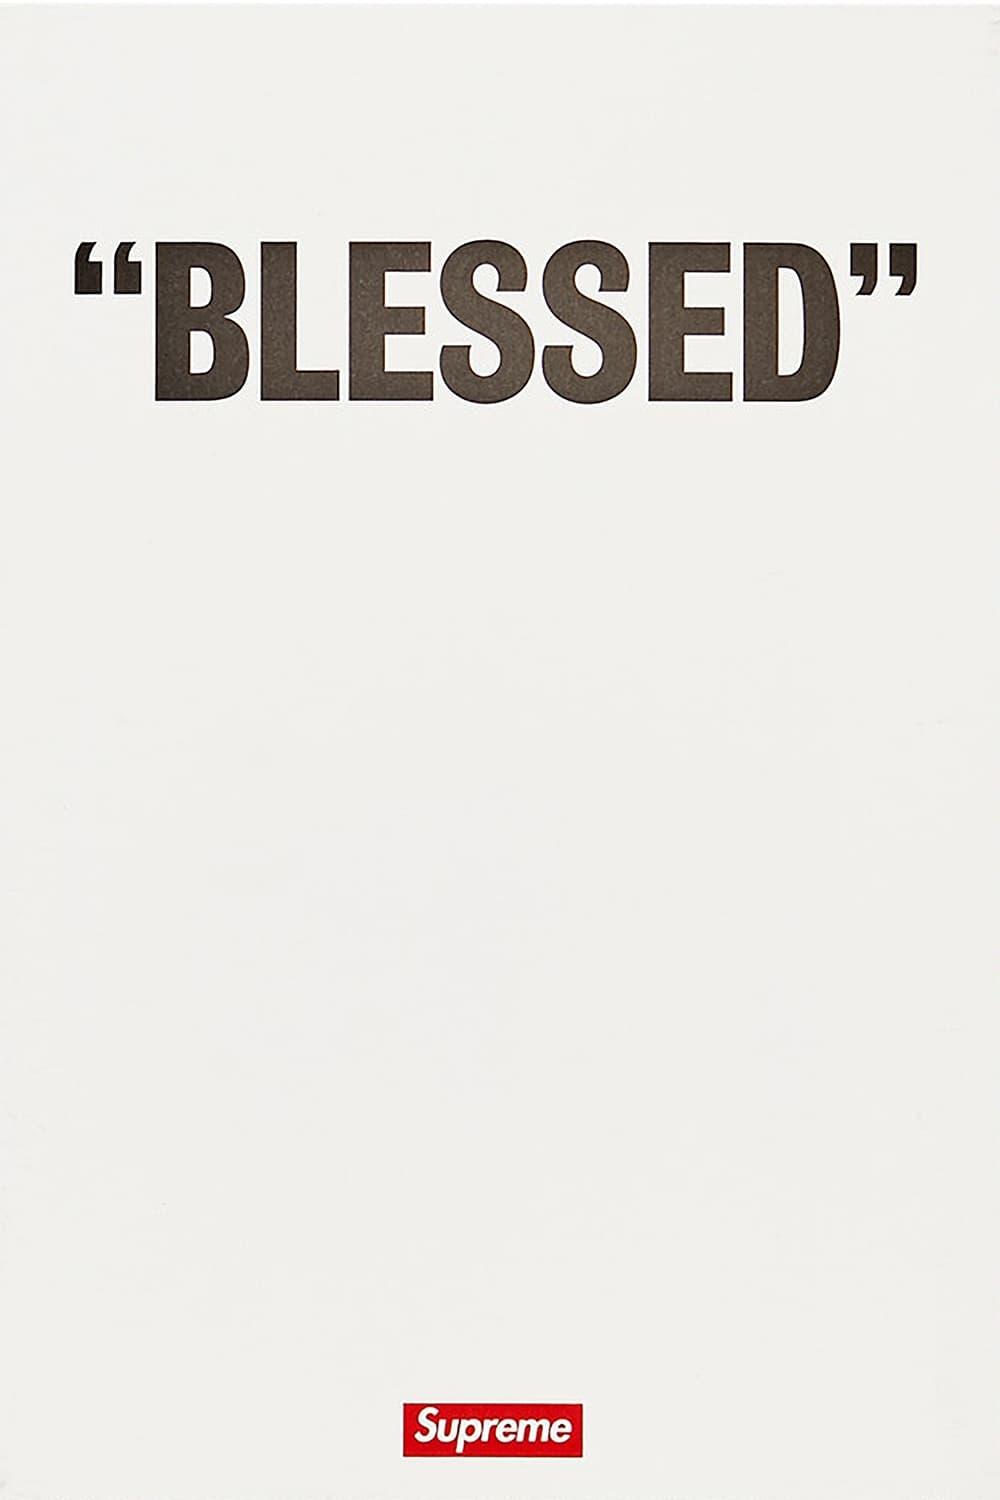 "BLESSED" poster